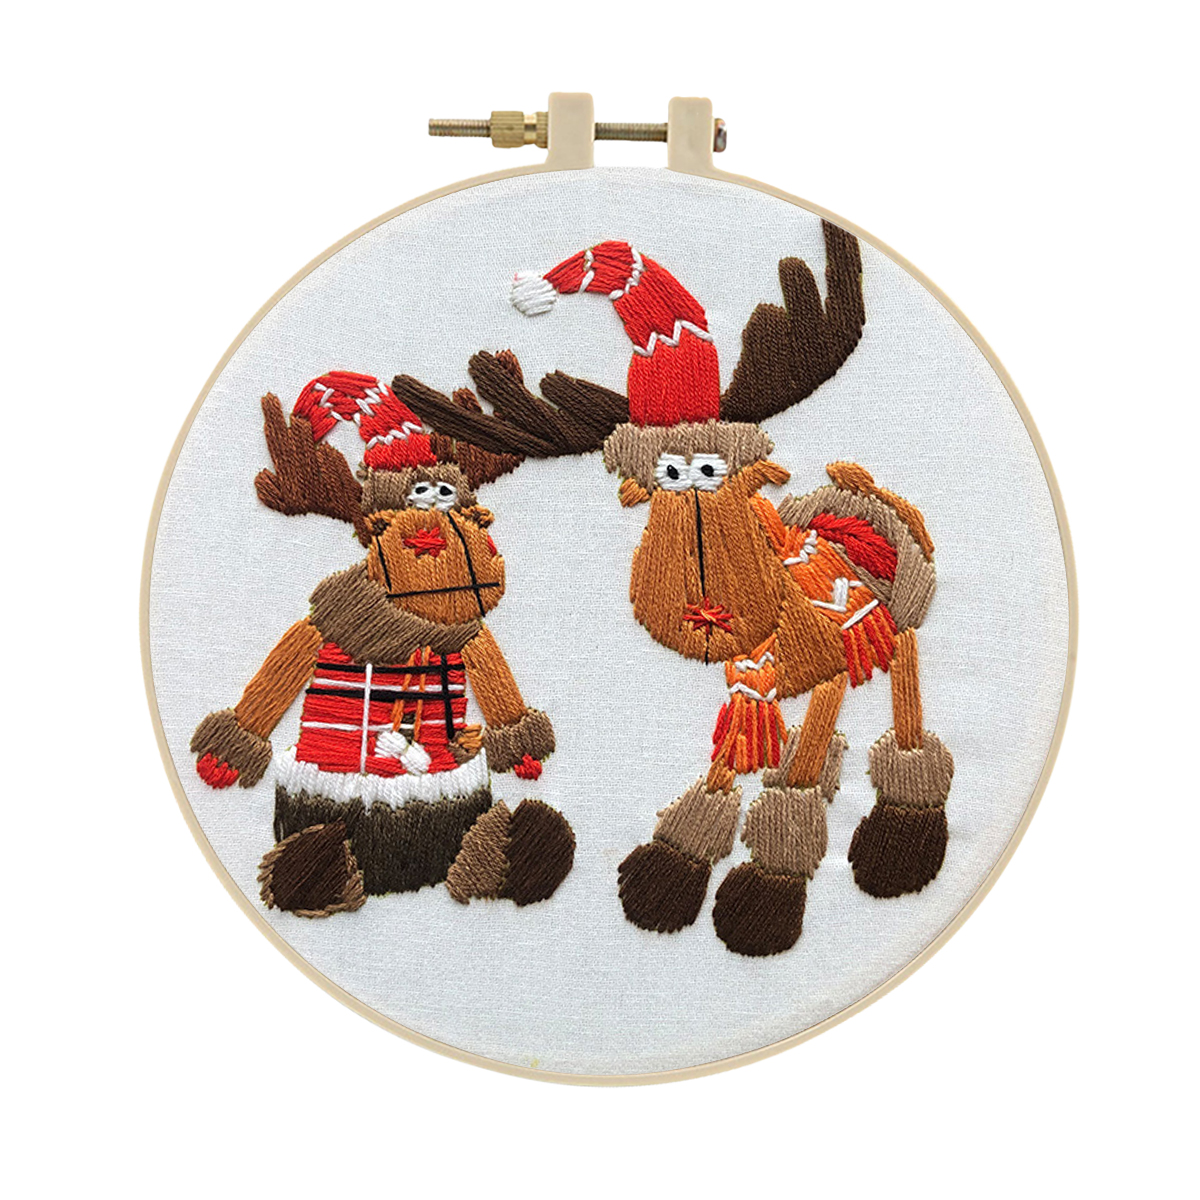 Handmade Christmas Embroidery Kit Cross stitch kit for Adult - Two Elk Pattern